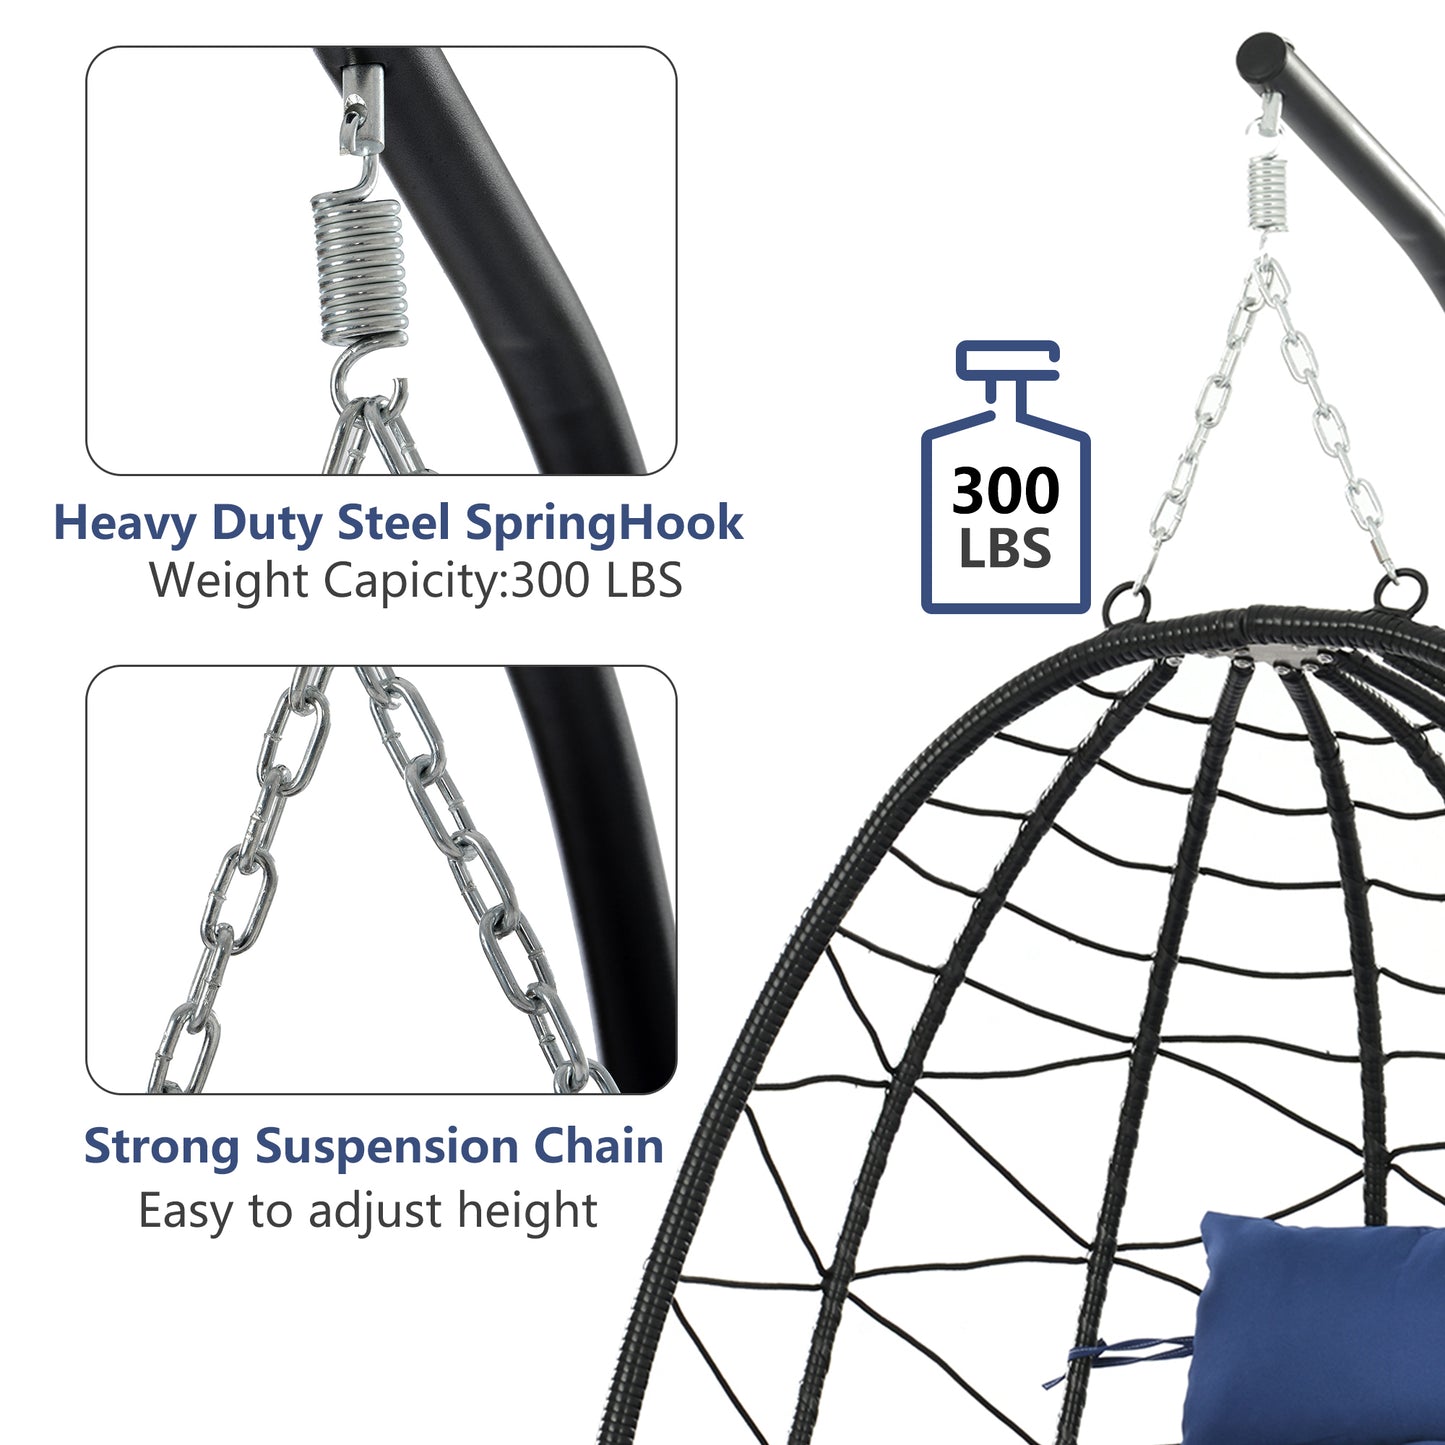 SYNGAR 2 Piece Indoor Outdoor Patio Wicker Hanging Chairs, Swing Hammock Egg Chairs Waterproof Cushions with Steel Frame, 300lbs Capacity for Patio Balcony Bedroom Living Room, Navy Blue